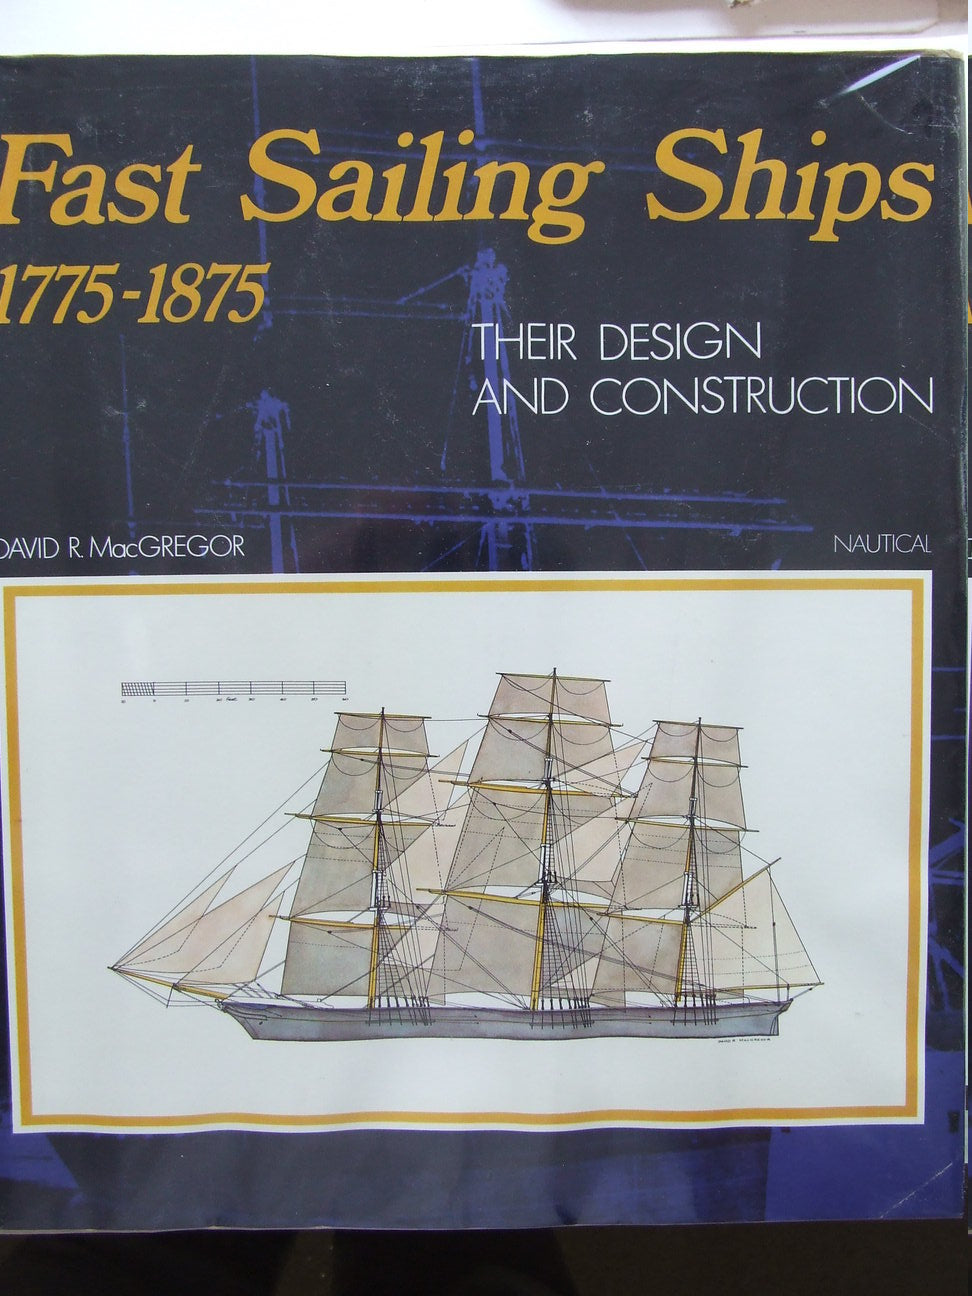 Fast Sailing Ships, their design and construction 1775-1875